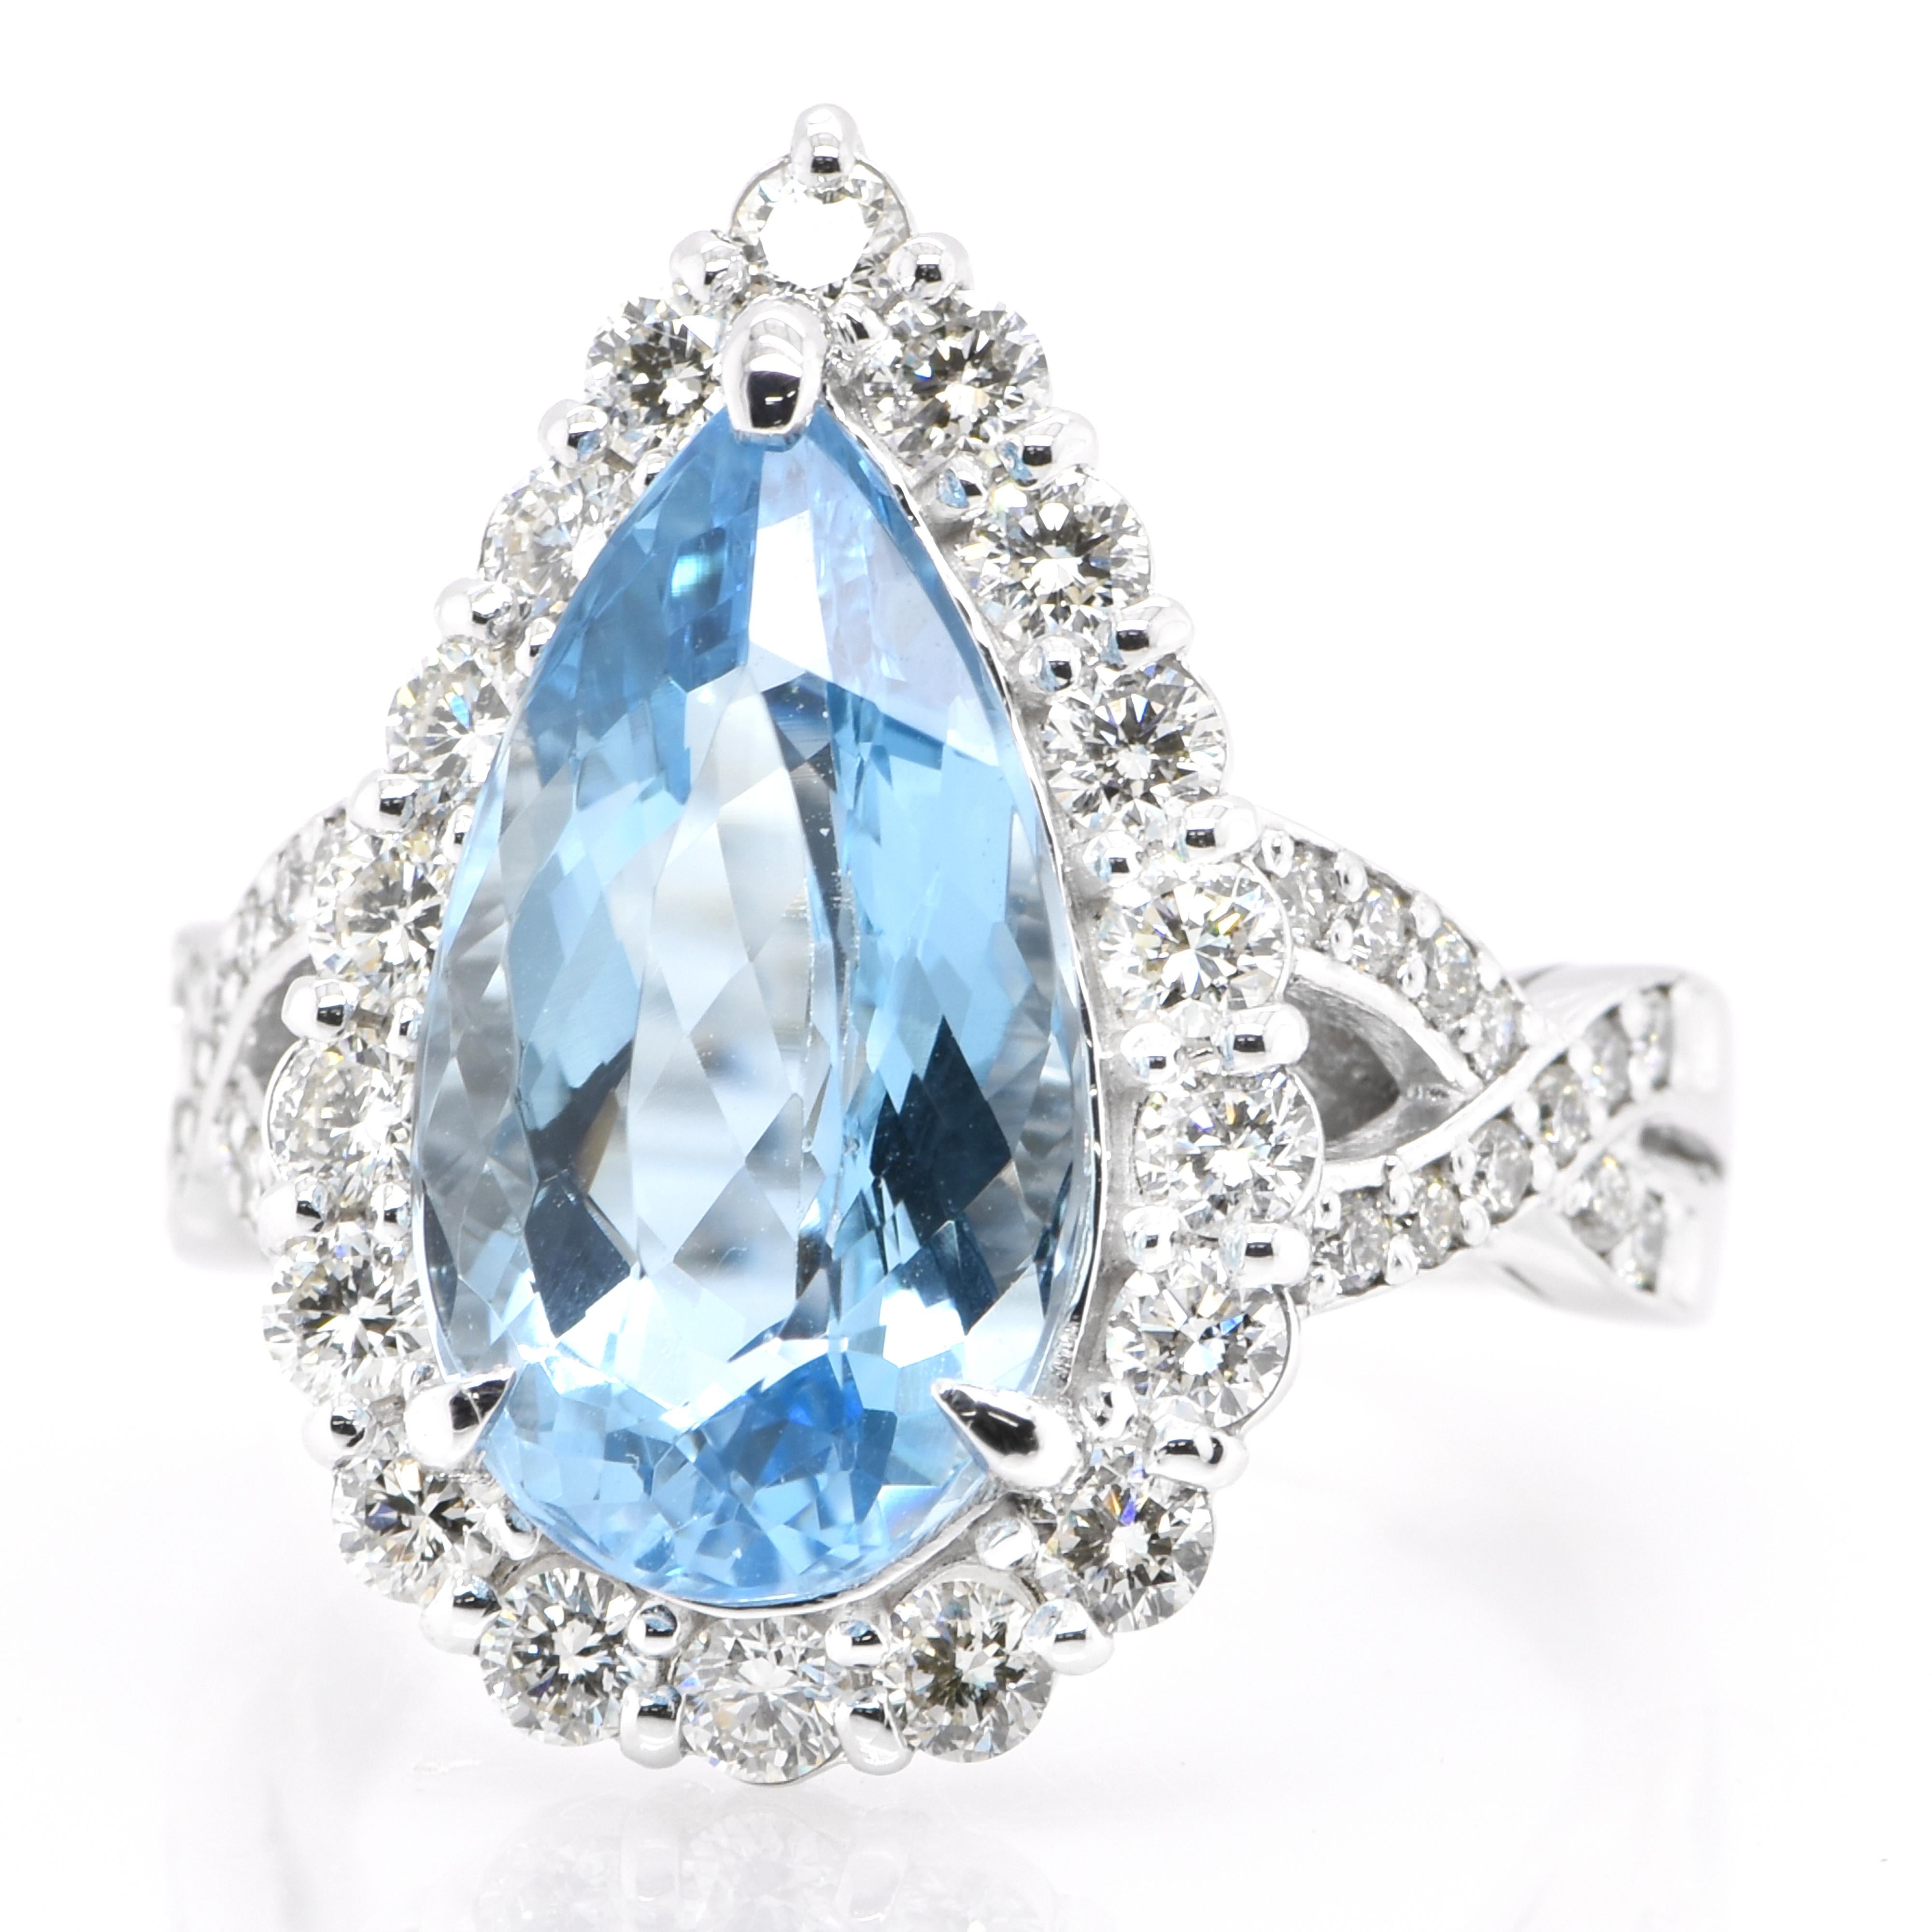 A beautiful Cocktail Ring featuring a 4.96 Carat, Natural, Aquamarine and 1.19 Carats of Diamond Accents set in Platinum. Aquamarines have been prized gems throughout human history for their cool blue color. They historically come from the Minas